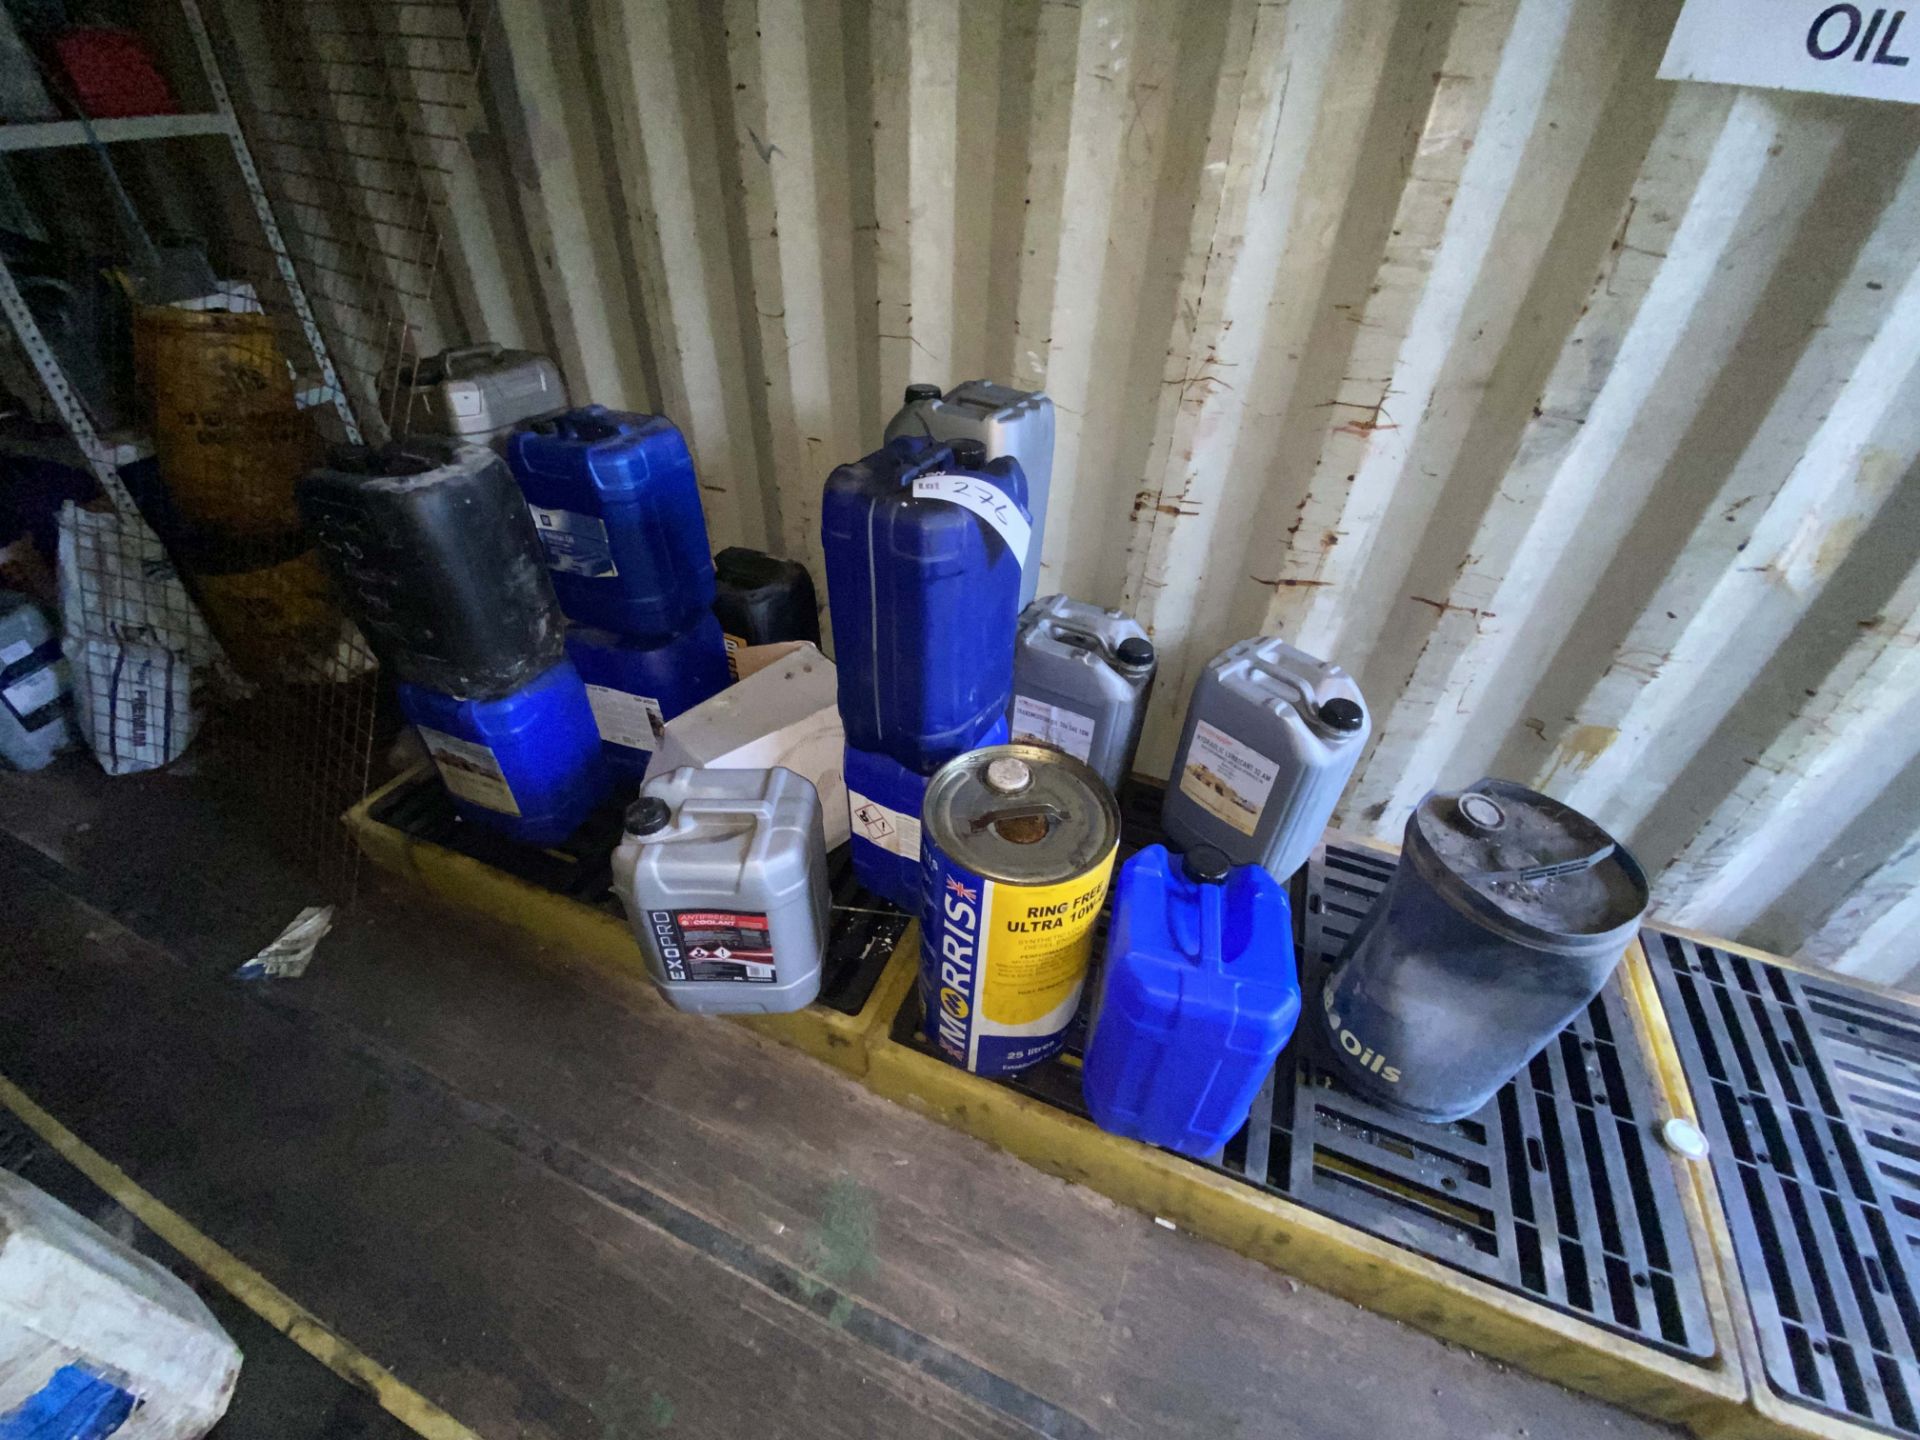 Assorted Drums, including hydraulic lubricant, transmission oil, motor oil, antifreeze, as set out